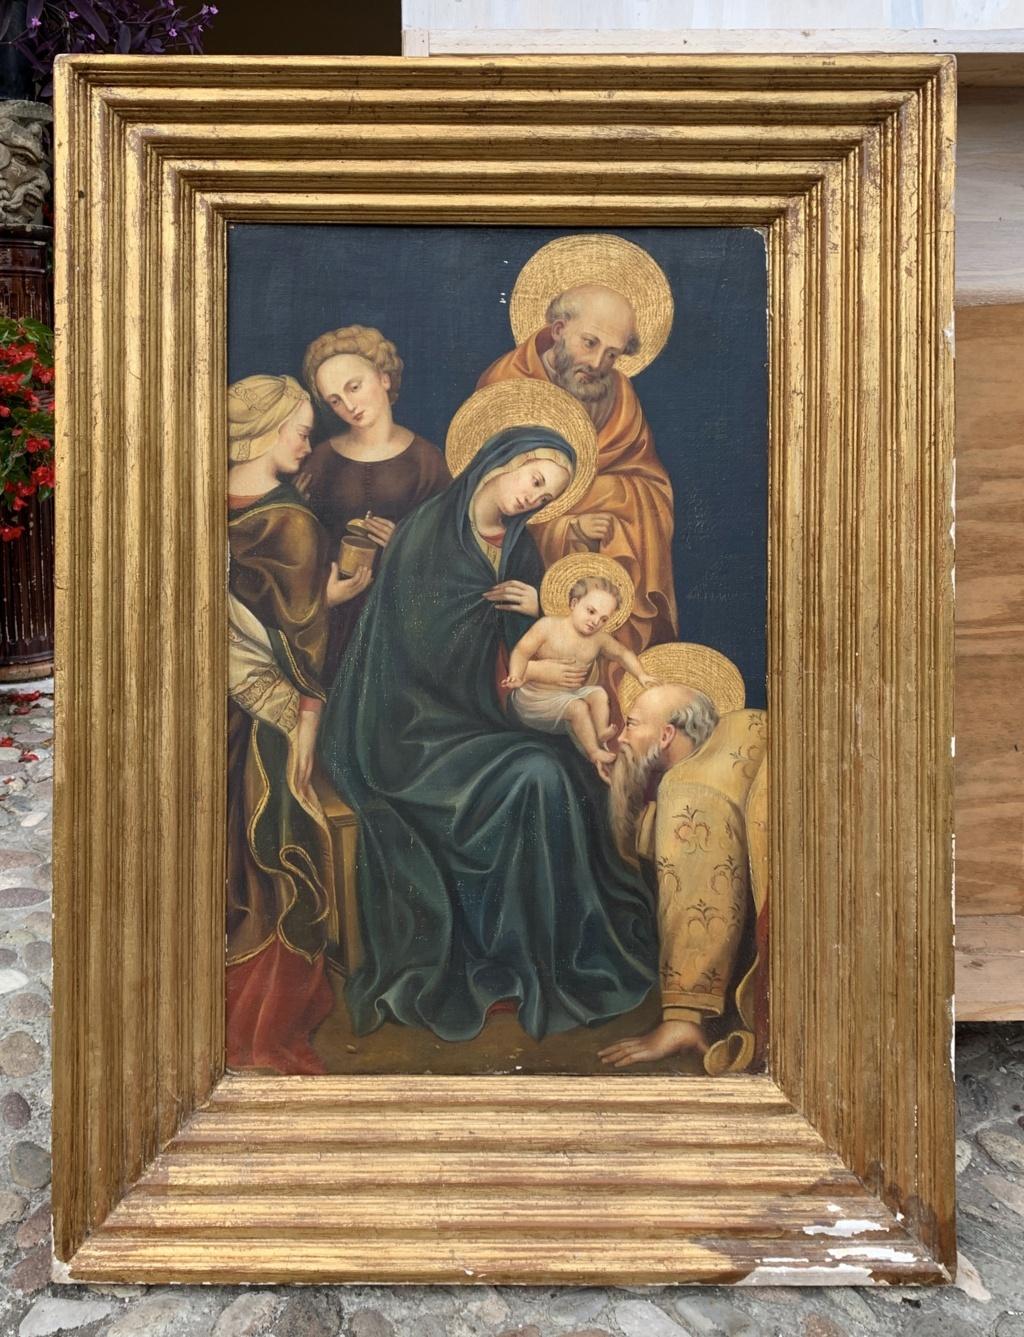 Italian Gothic style painter - 19th century figure painting - Virgin child - Painting by Unknown